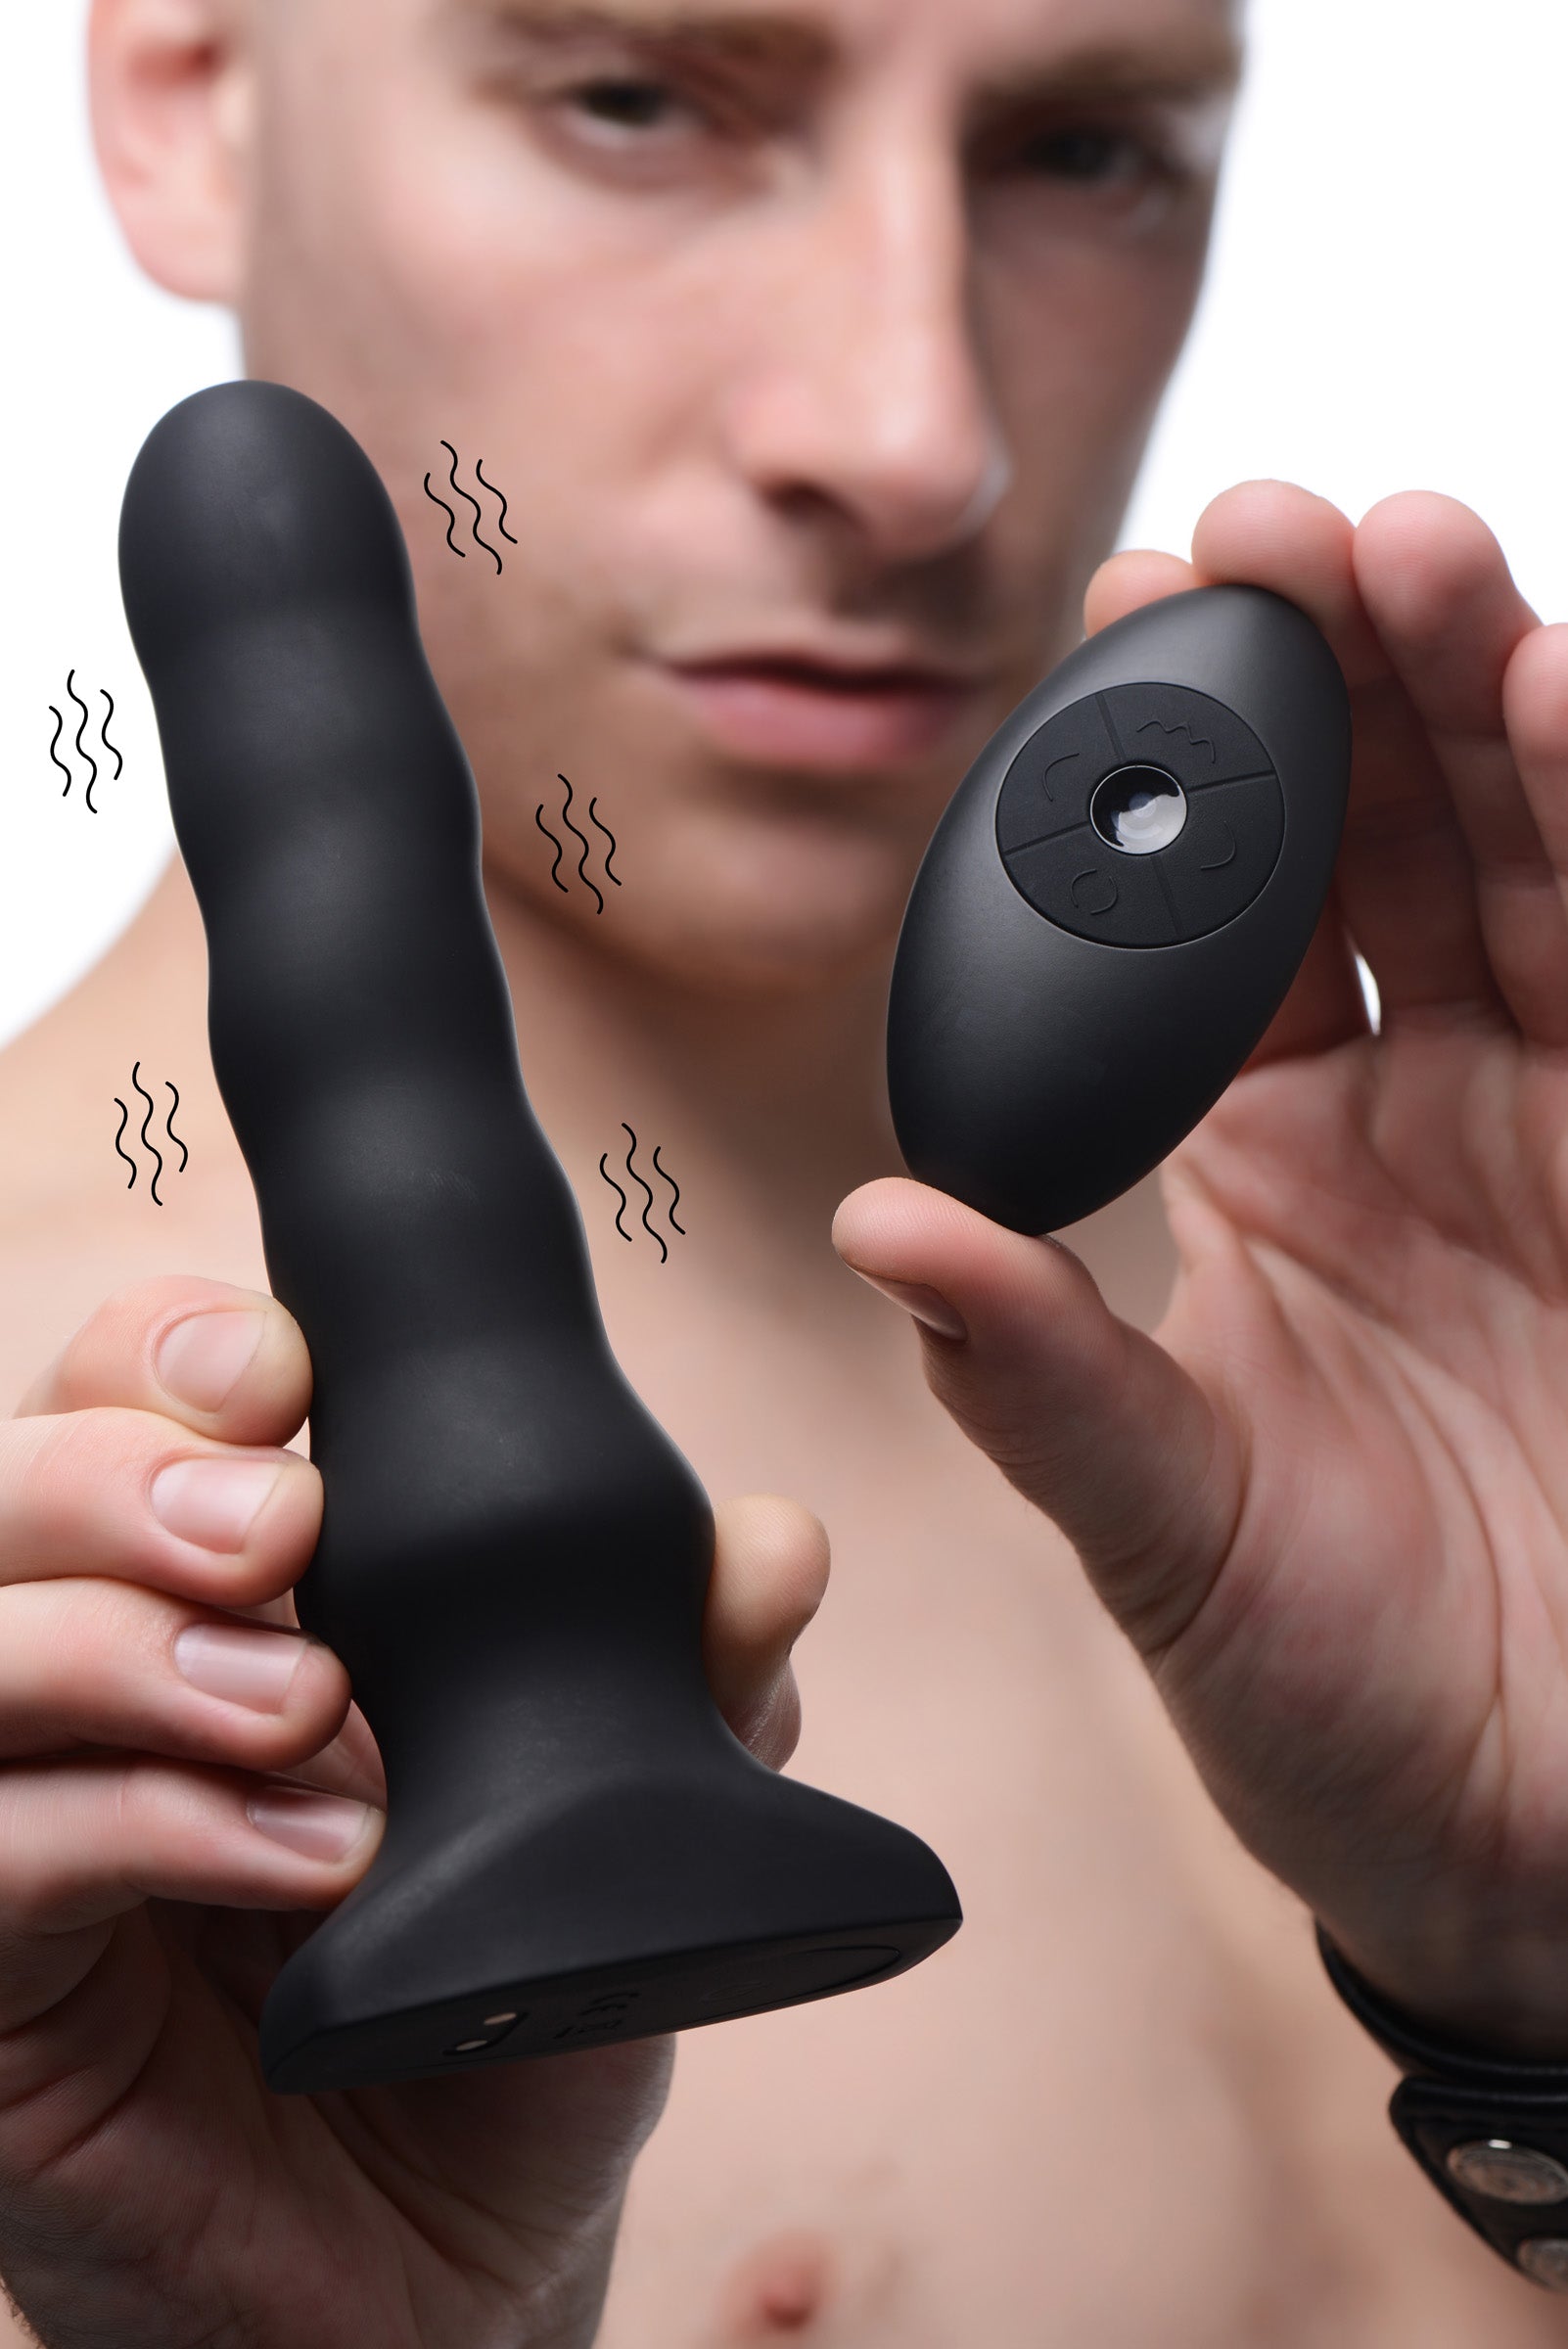 Silicone Vibrating and Squirming Plug with Remote Control - UABDSM